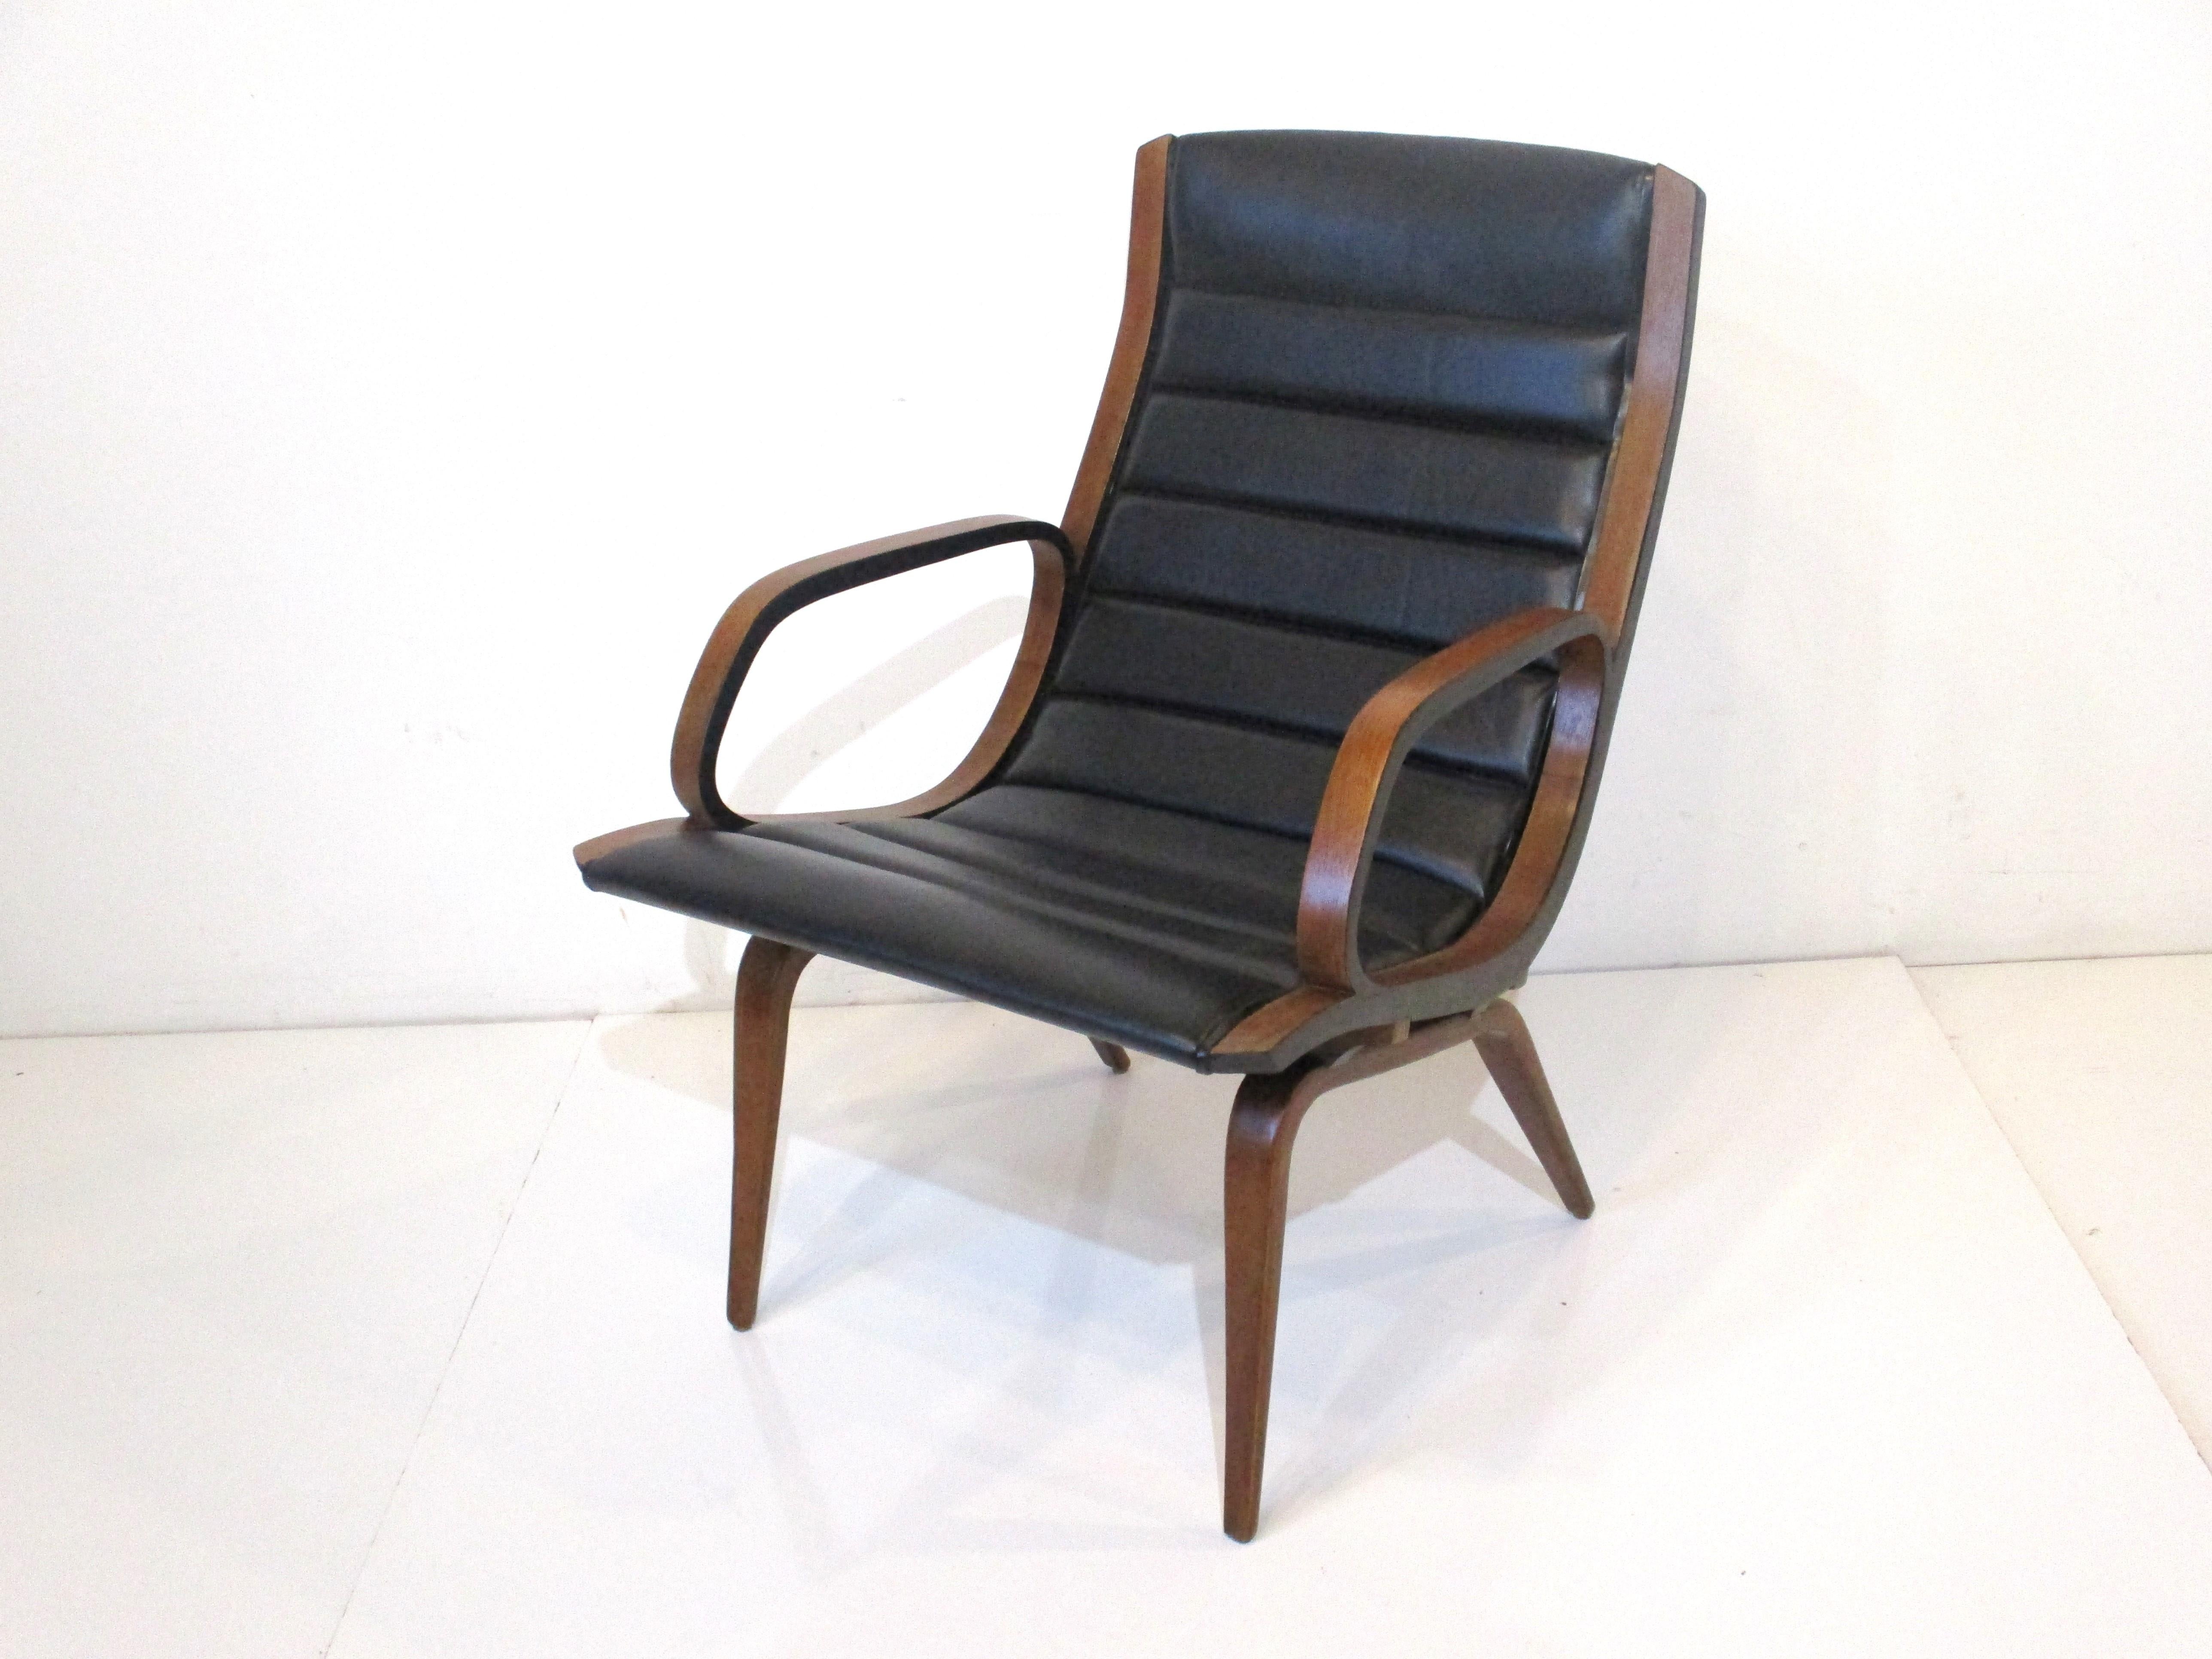 A sculptural bent wood framed arm chair / lounge chair with ribbed black leatherette upholstery. This rare form shares it's DNA with the other pieces designed by Norman Chener with a light visual feel, plenty of comfort and very sturdy construction.